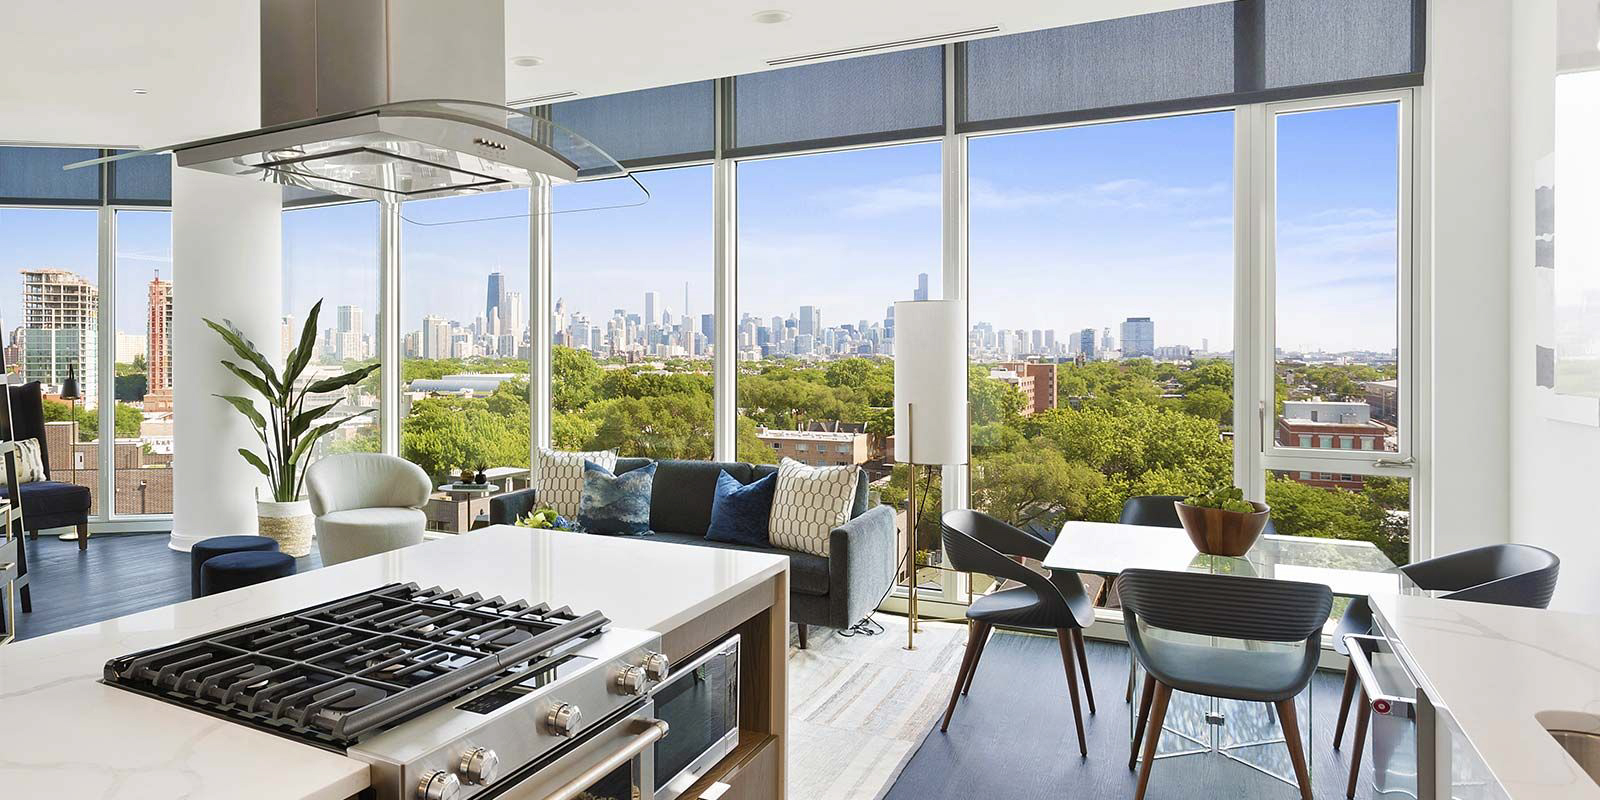 Looking for new luxury apartments for rent near Lincoln Park?